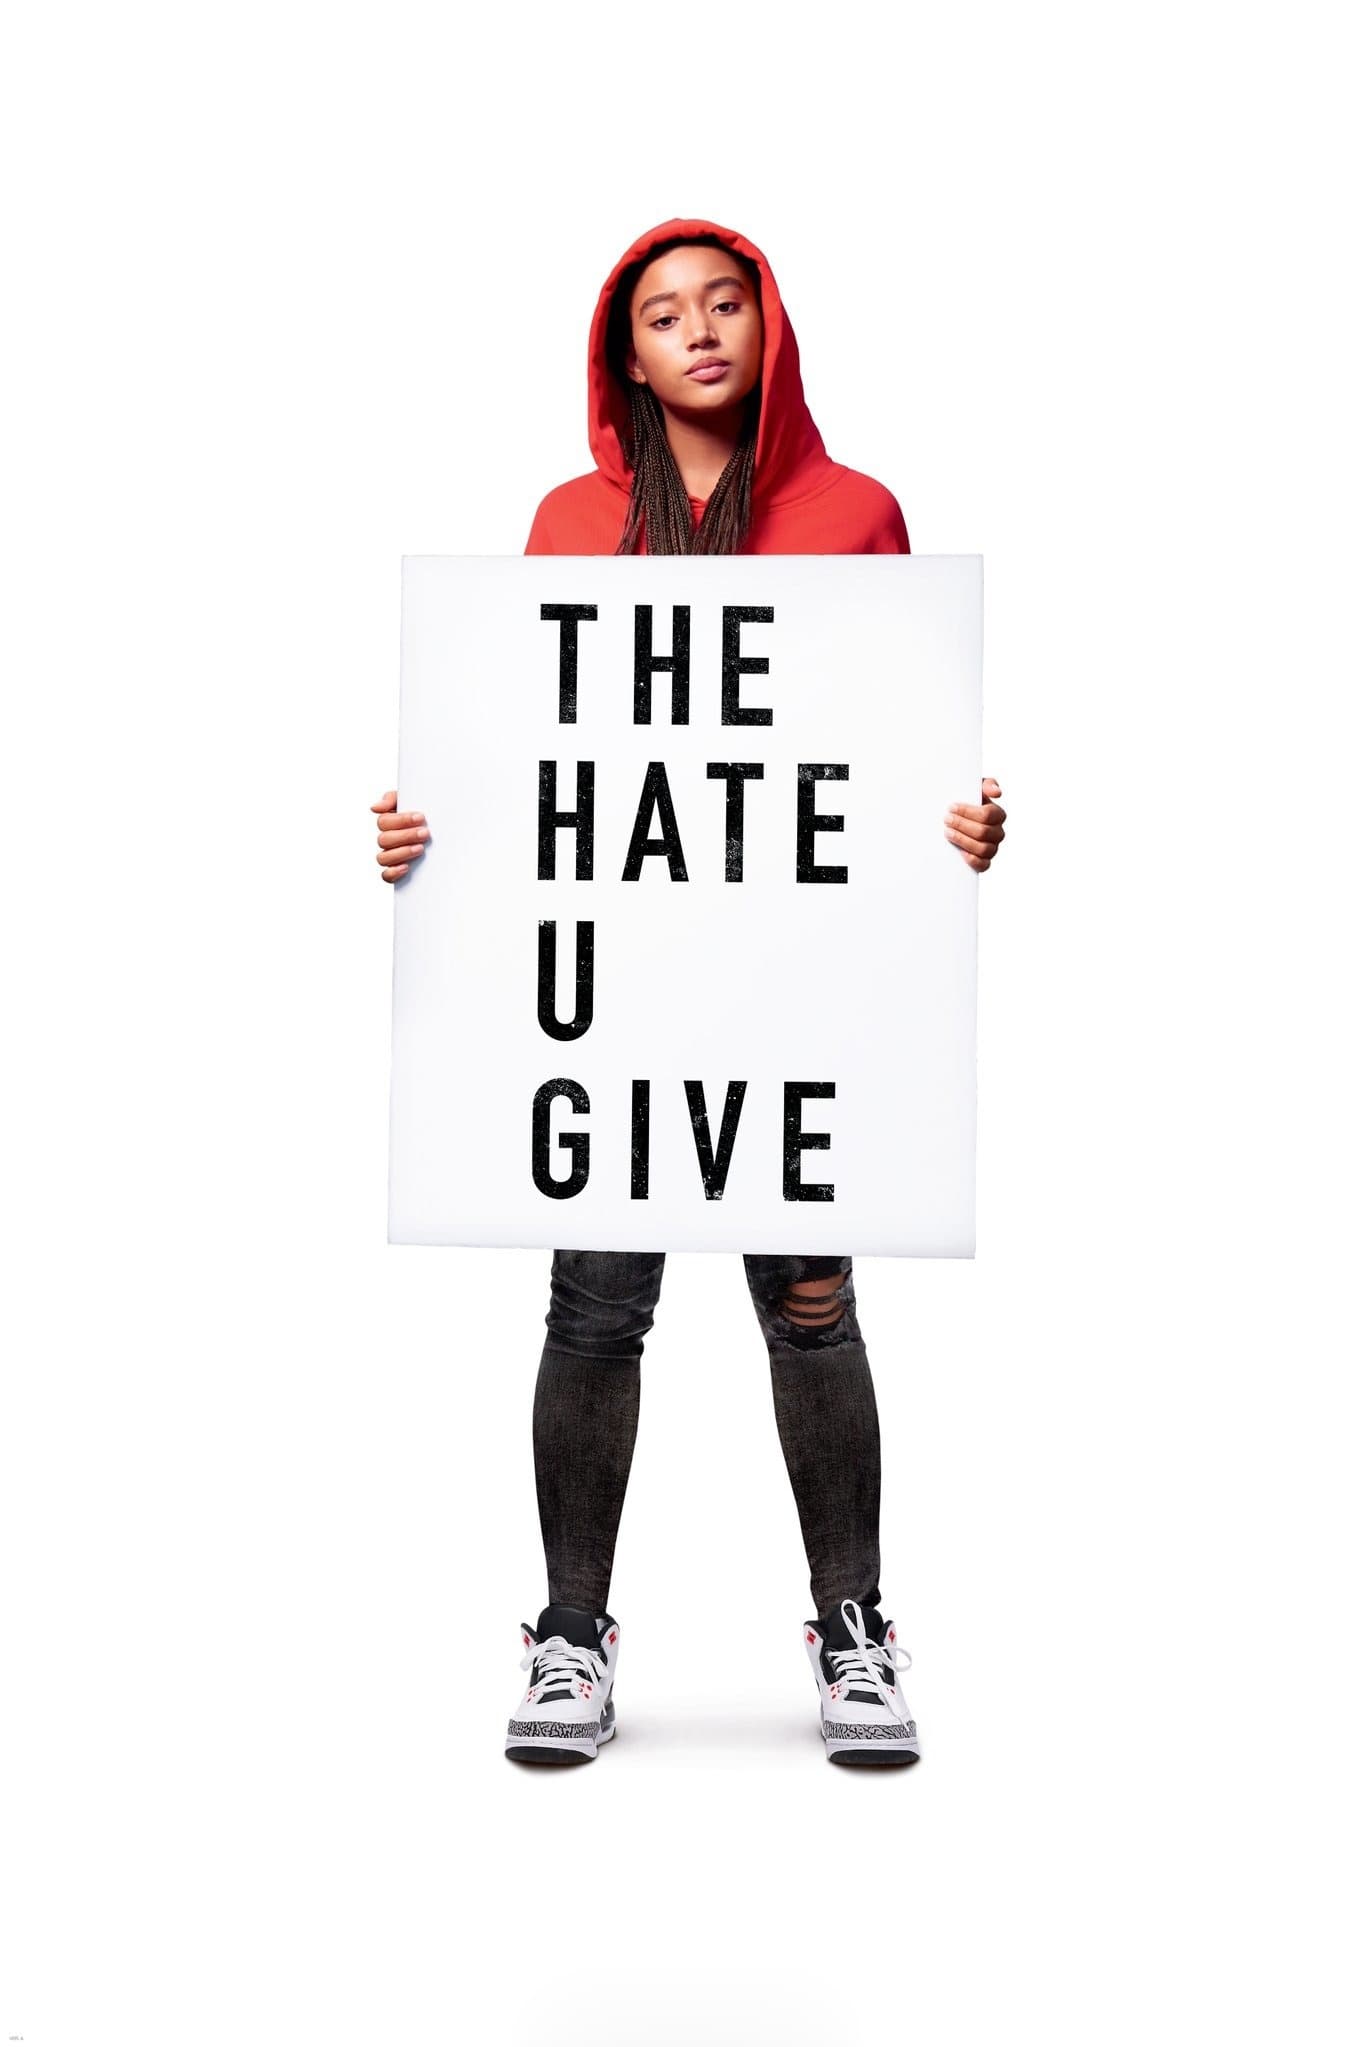 the hate you give synopsis